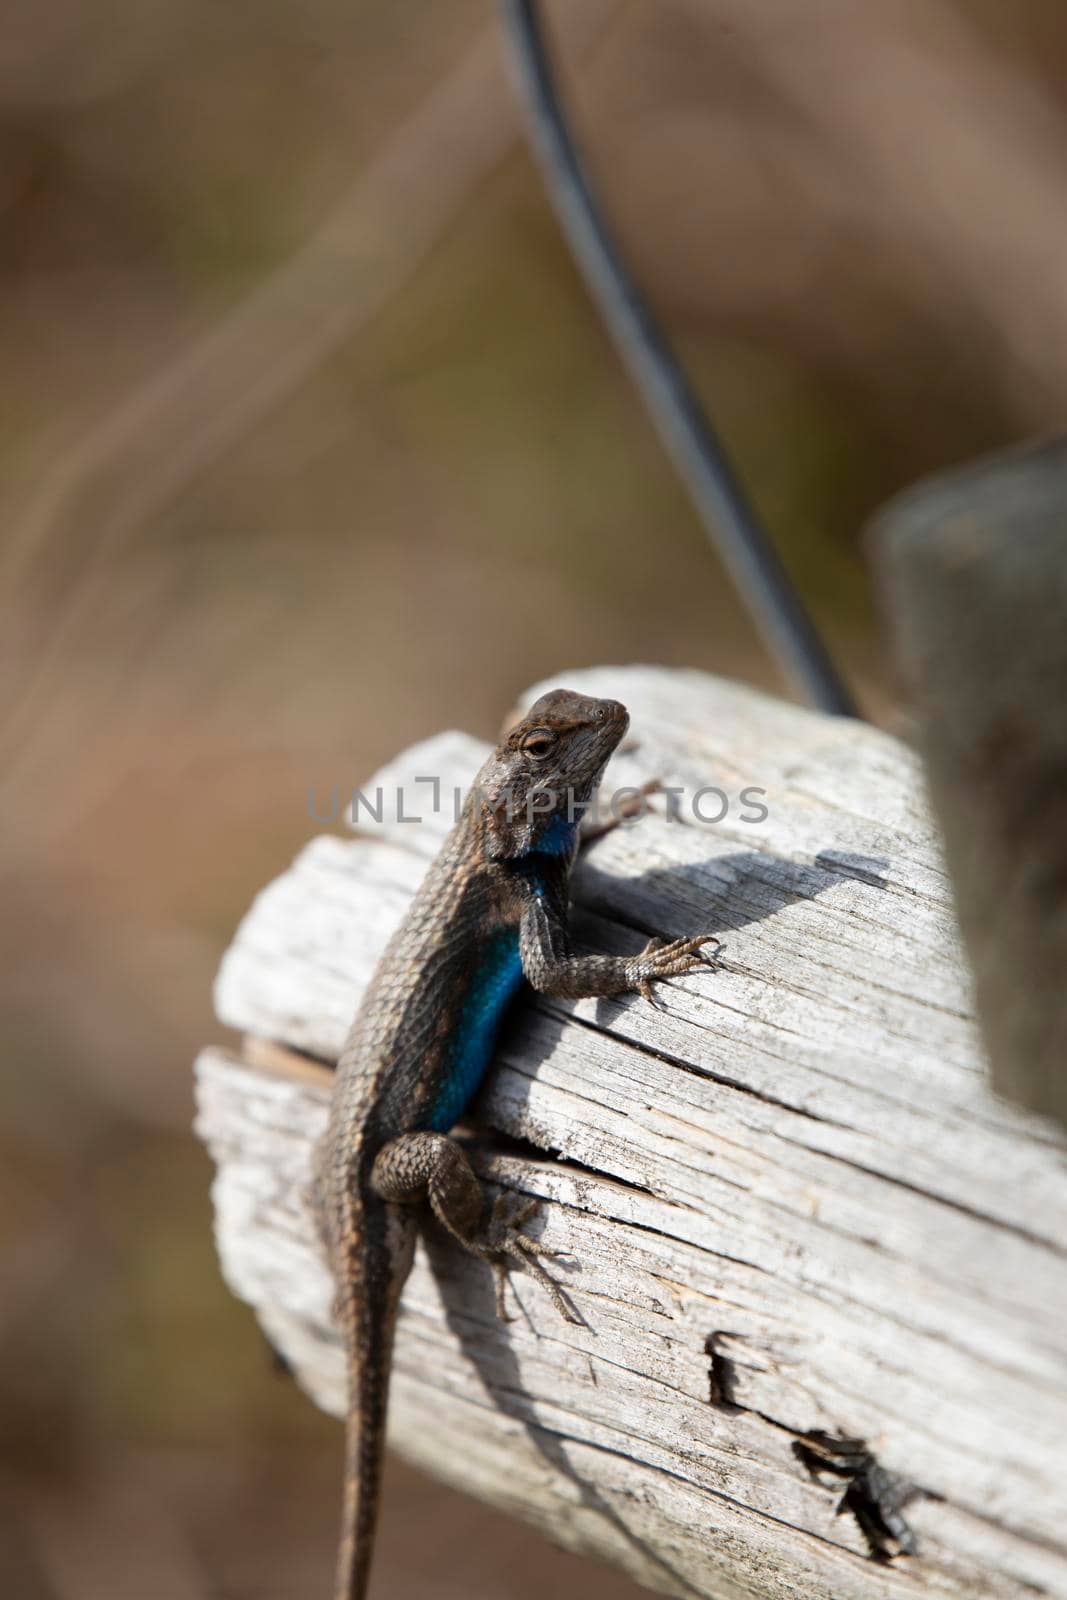 Large male eastern fence lizard (Sceloporus consobrinus) on a wooden post